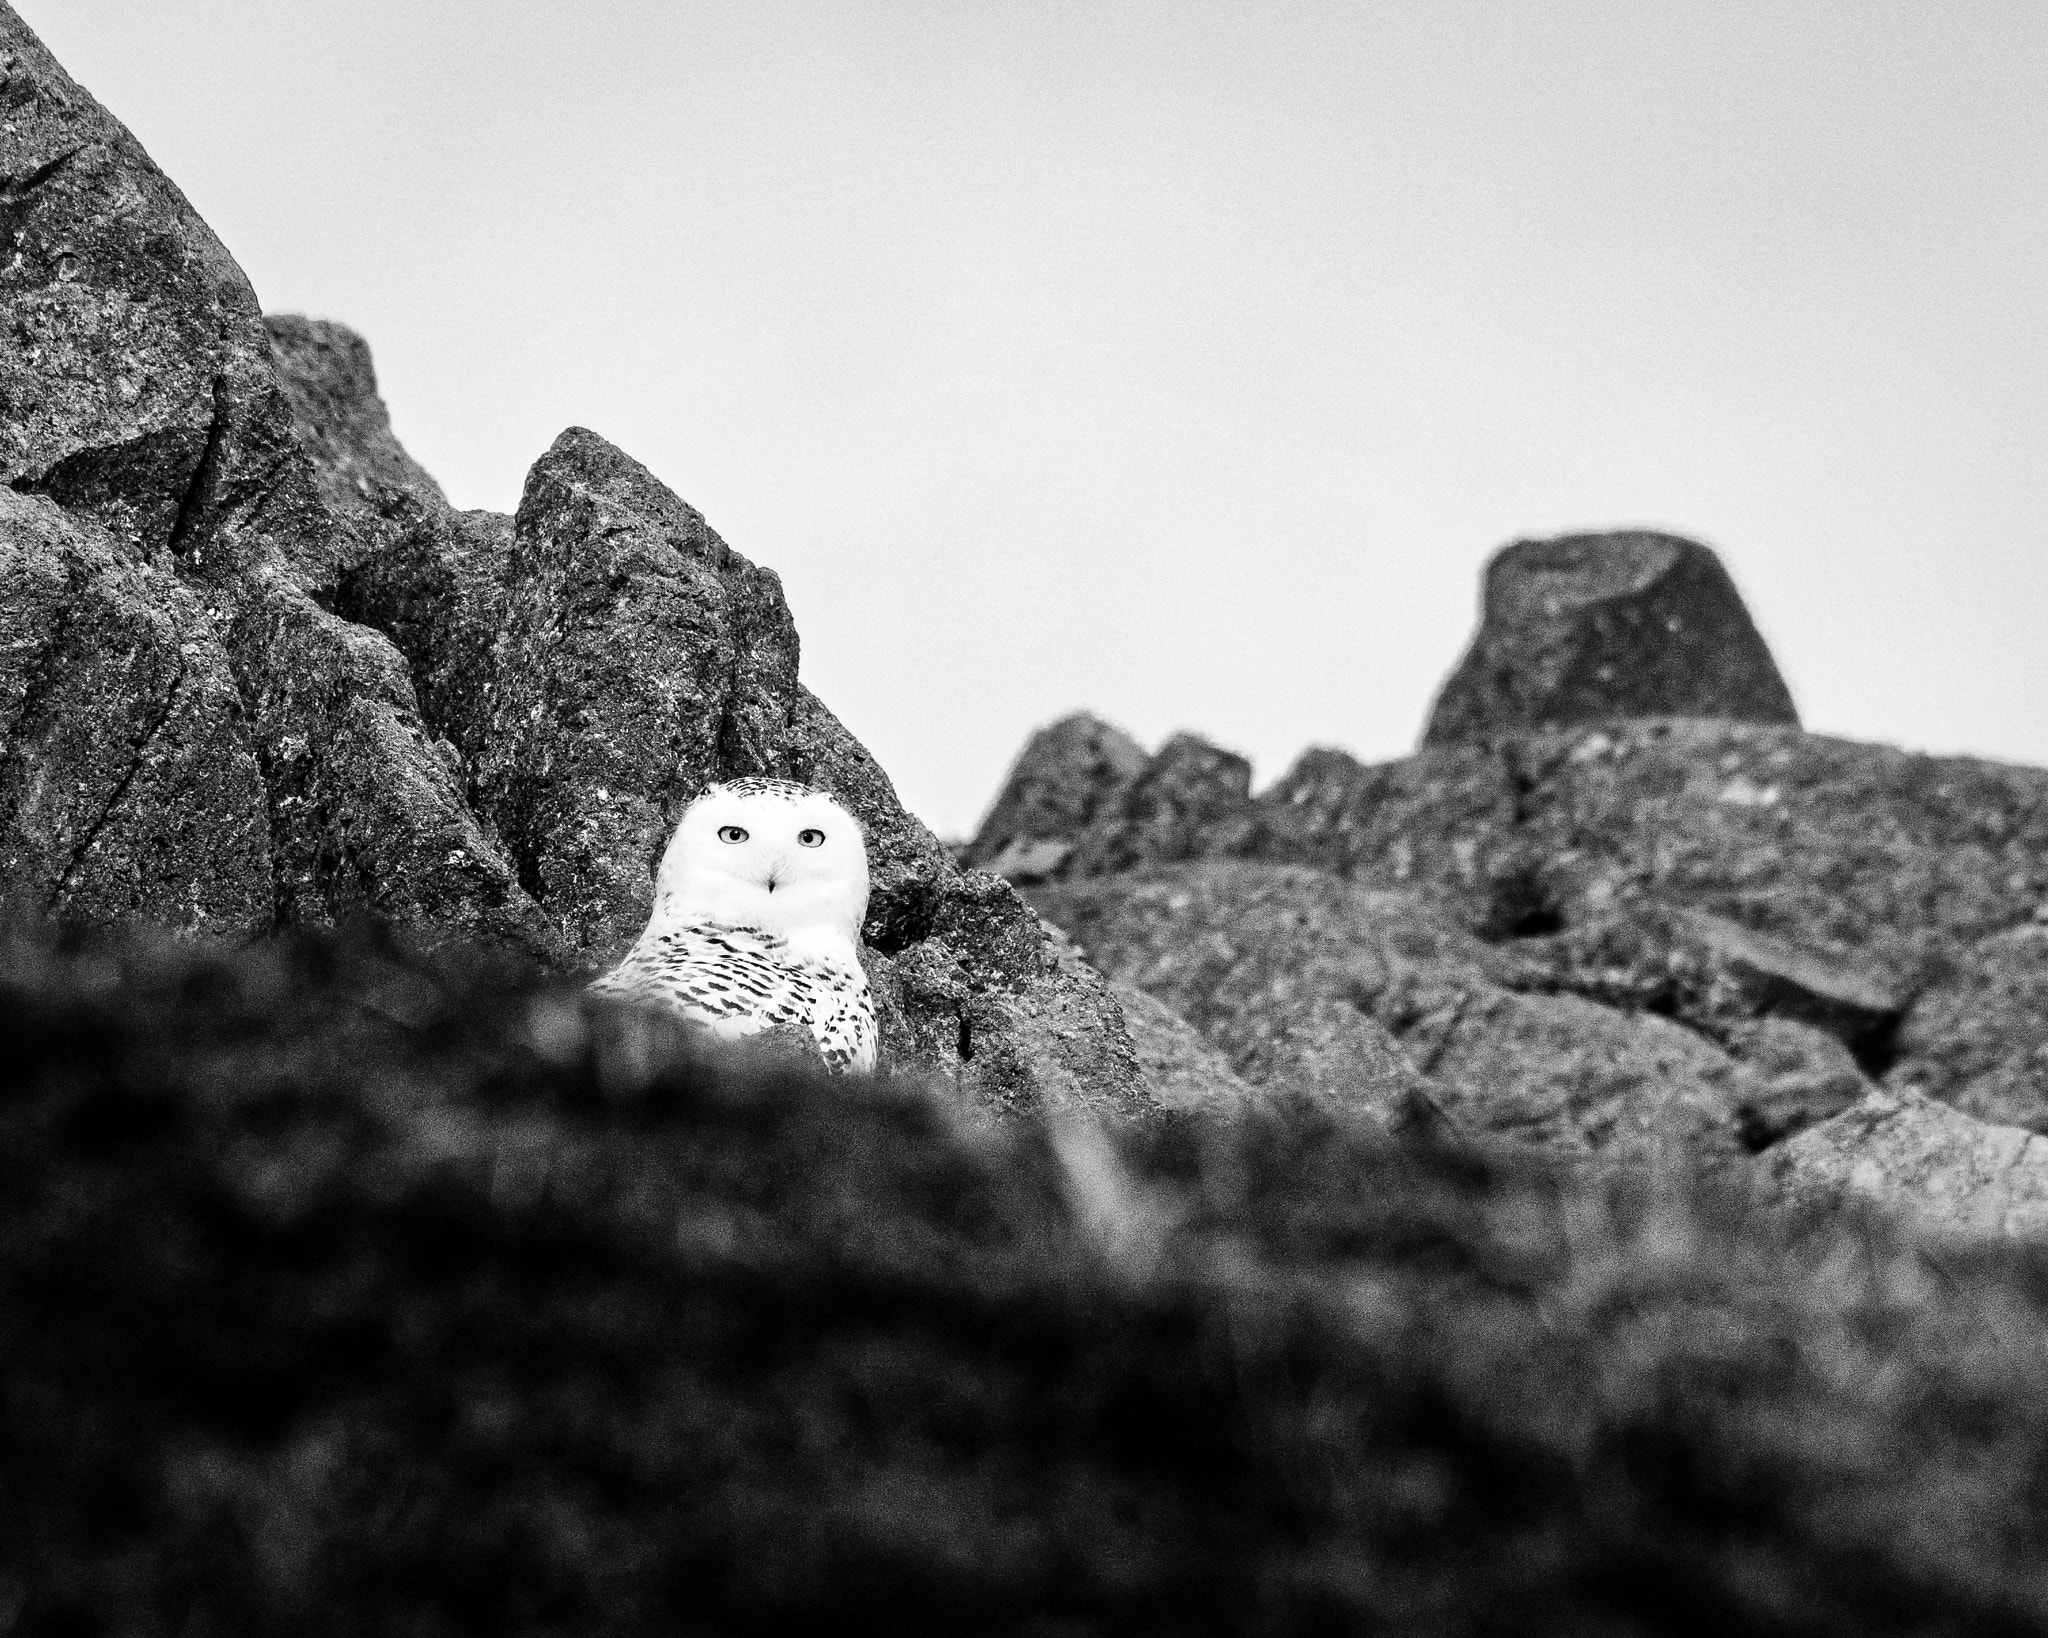 Pentax K-3 sample photo. Snowy owl in bnw photography